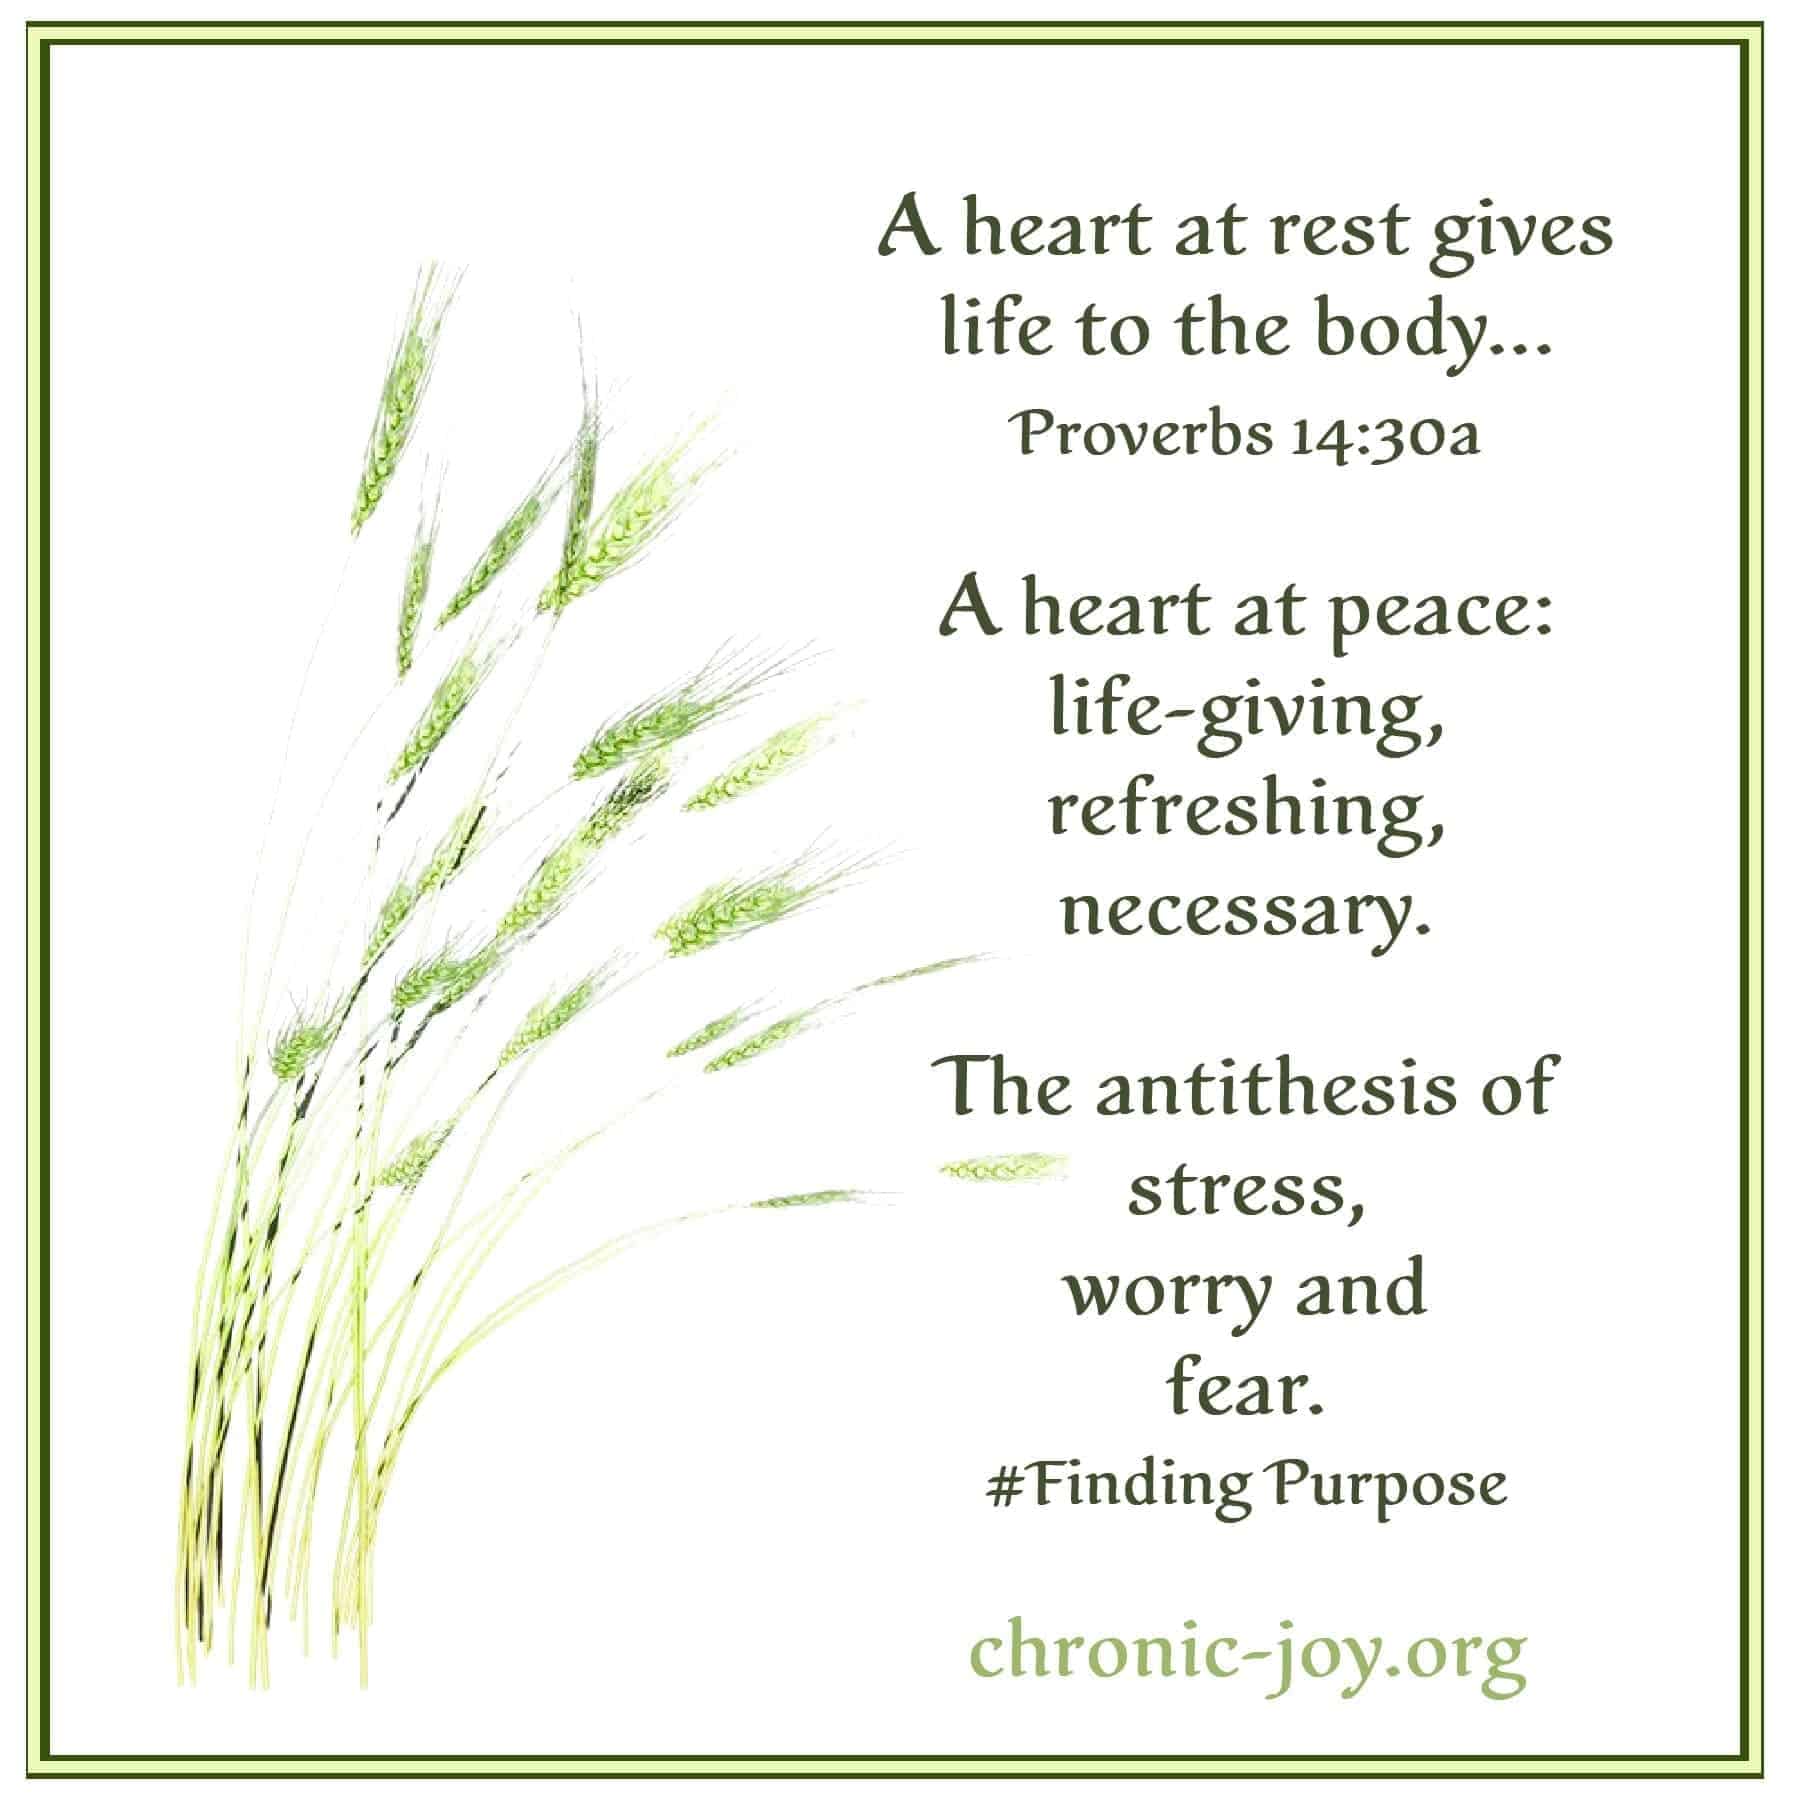 A heart at rest gives life to a body...